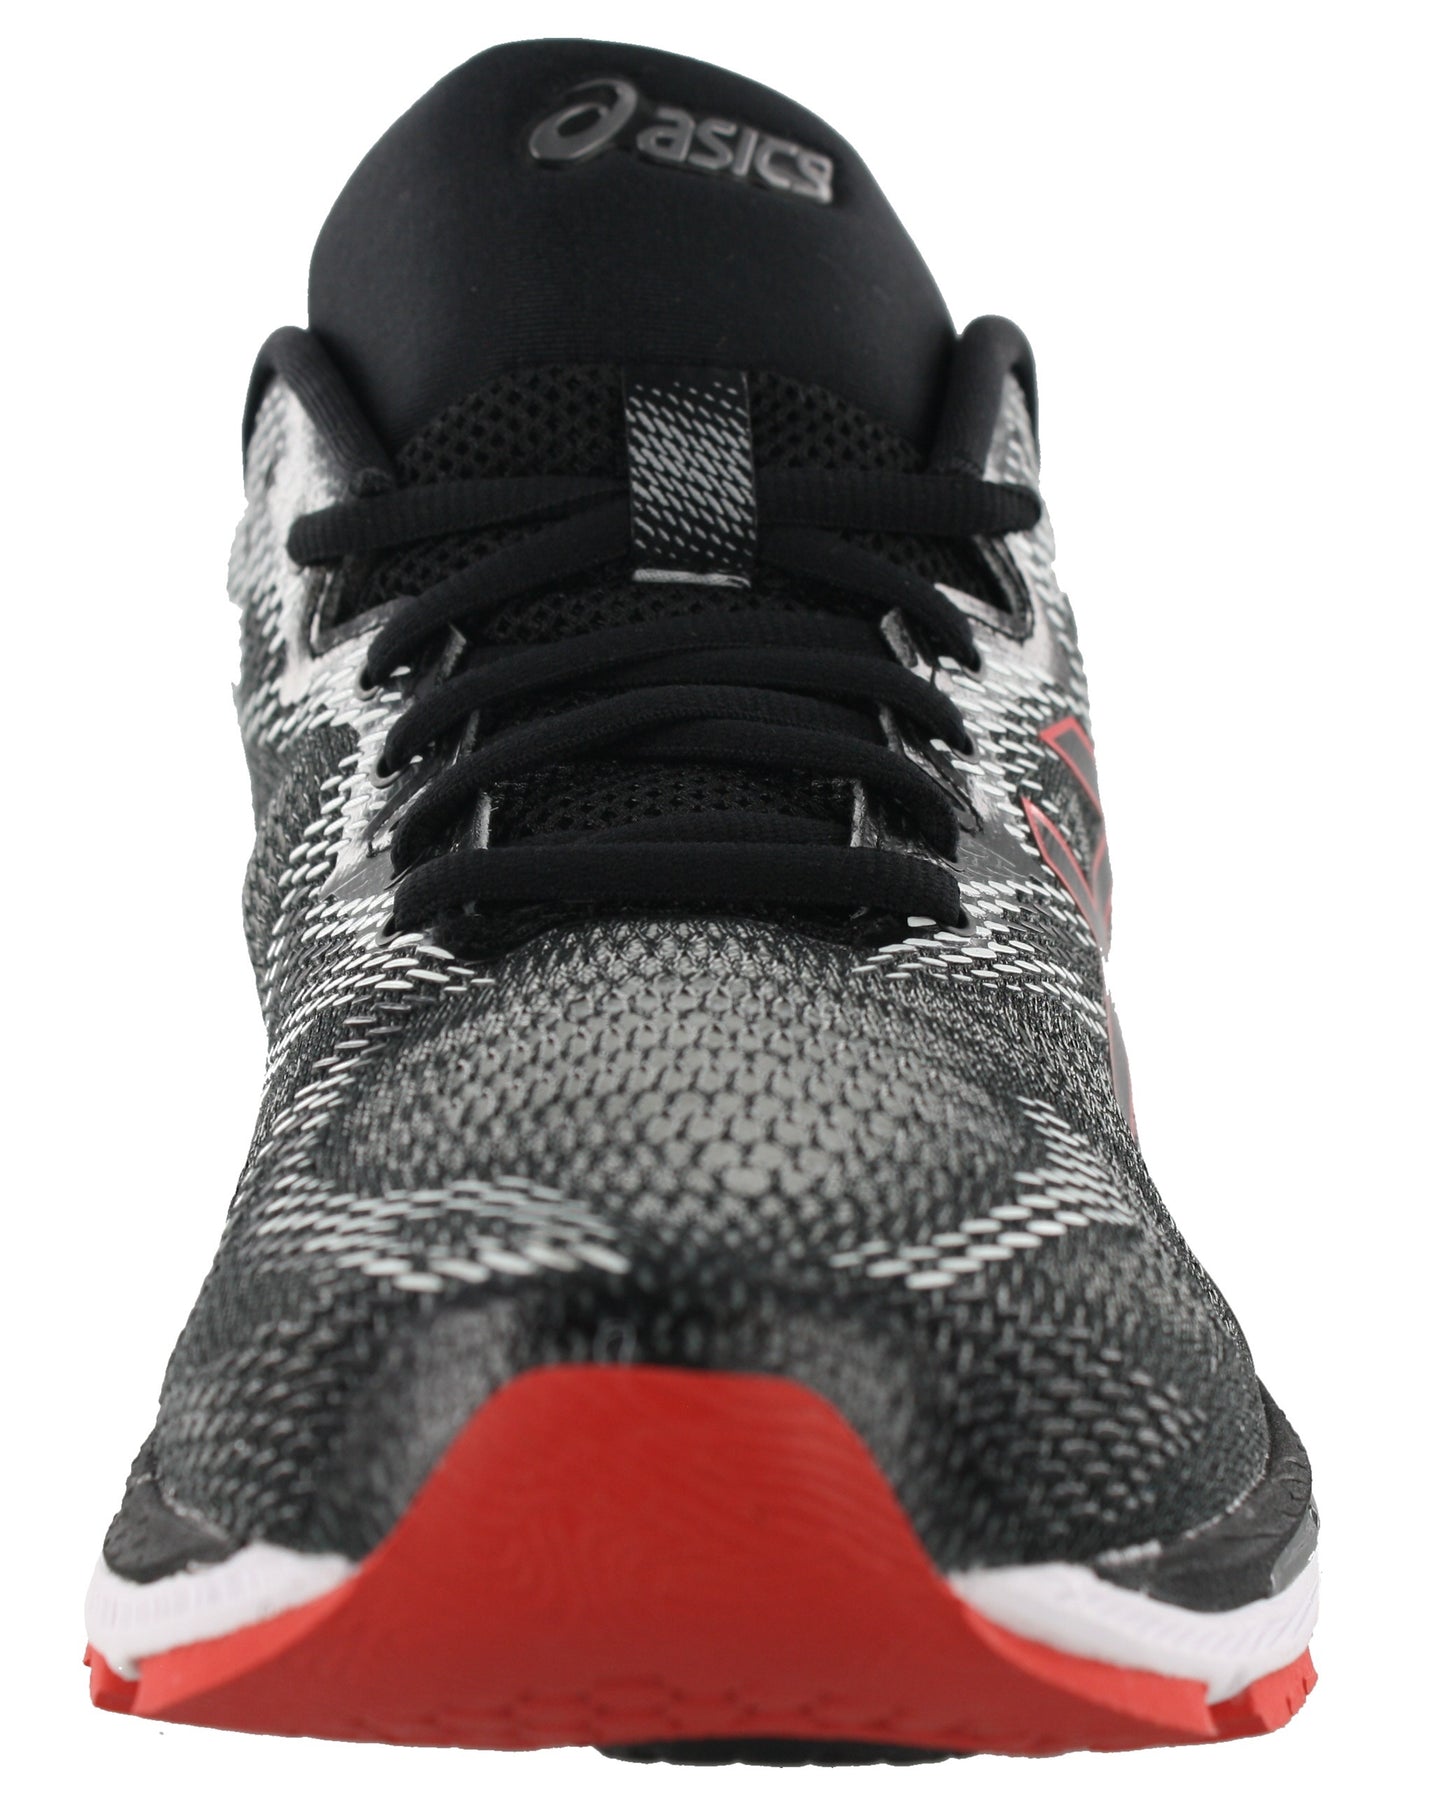 
                  
                    Front of Black with Red Alert, Grey, and White accents ASICS Men Walking Trail Cushioned Running Shoes Gel Nimbus 20
                  
                